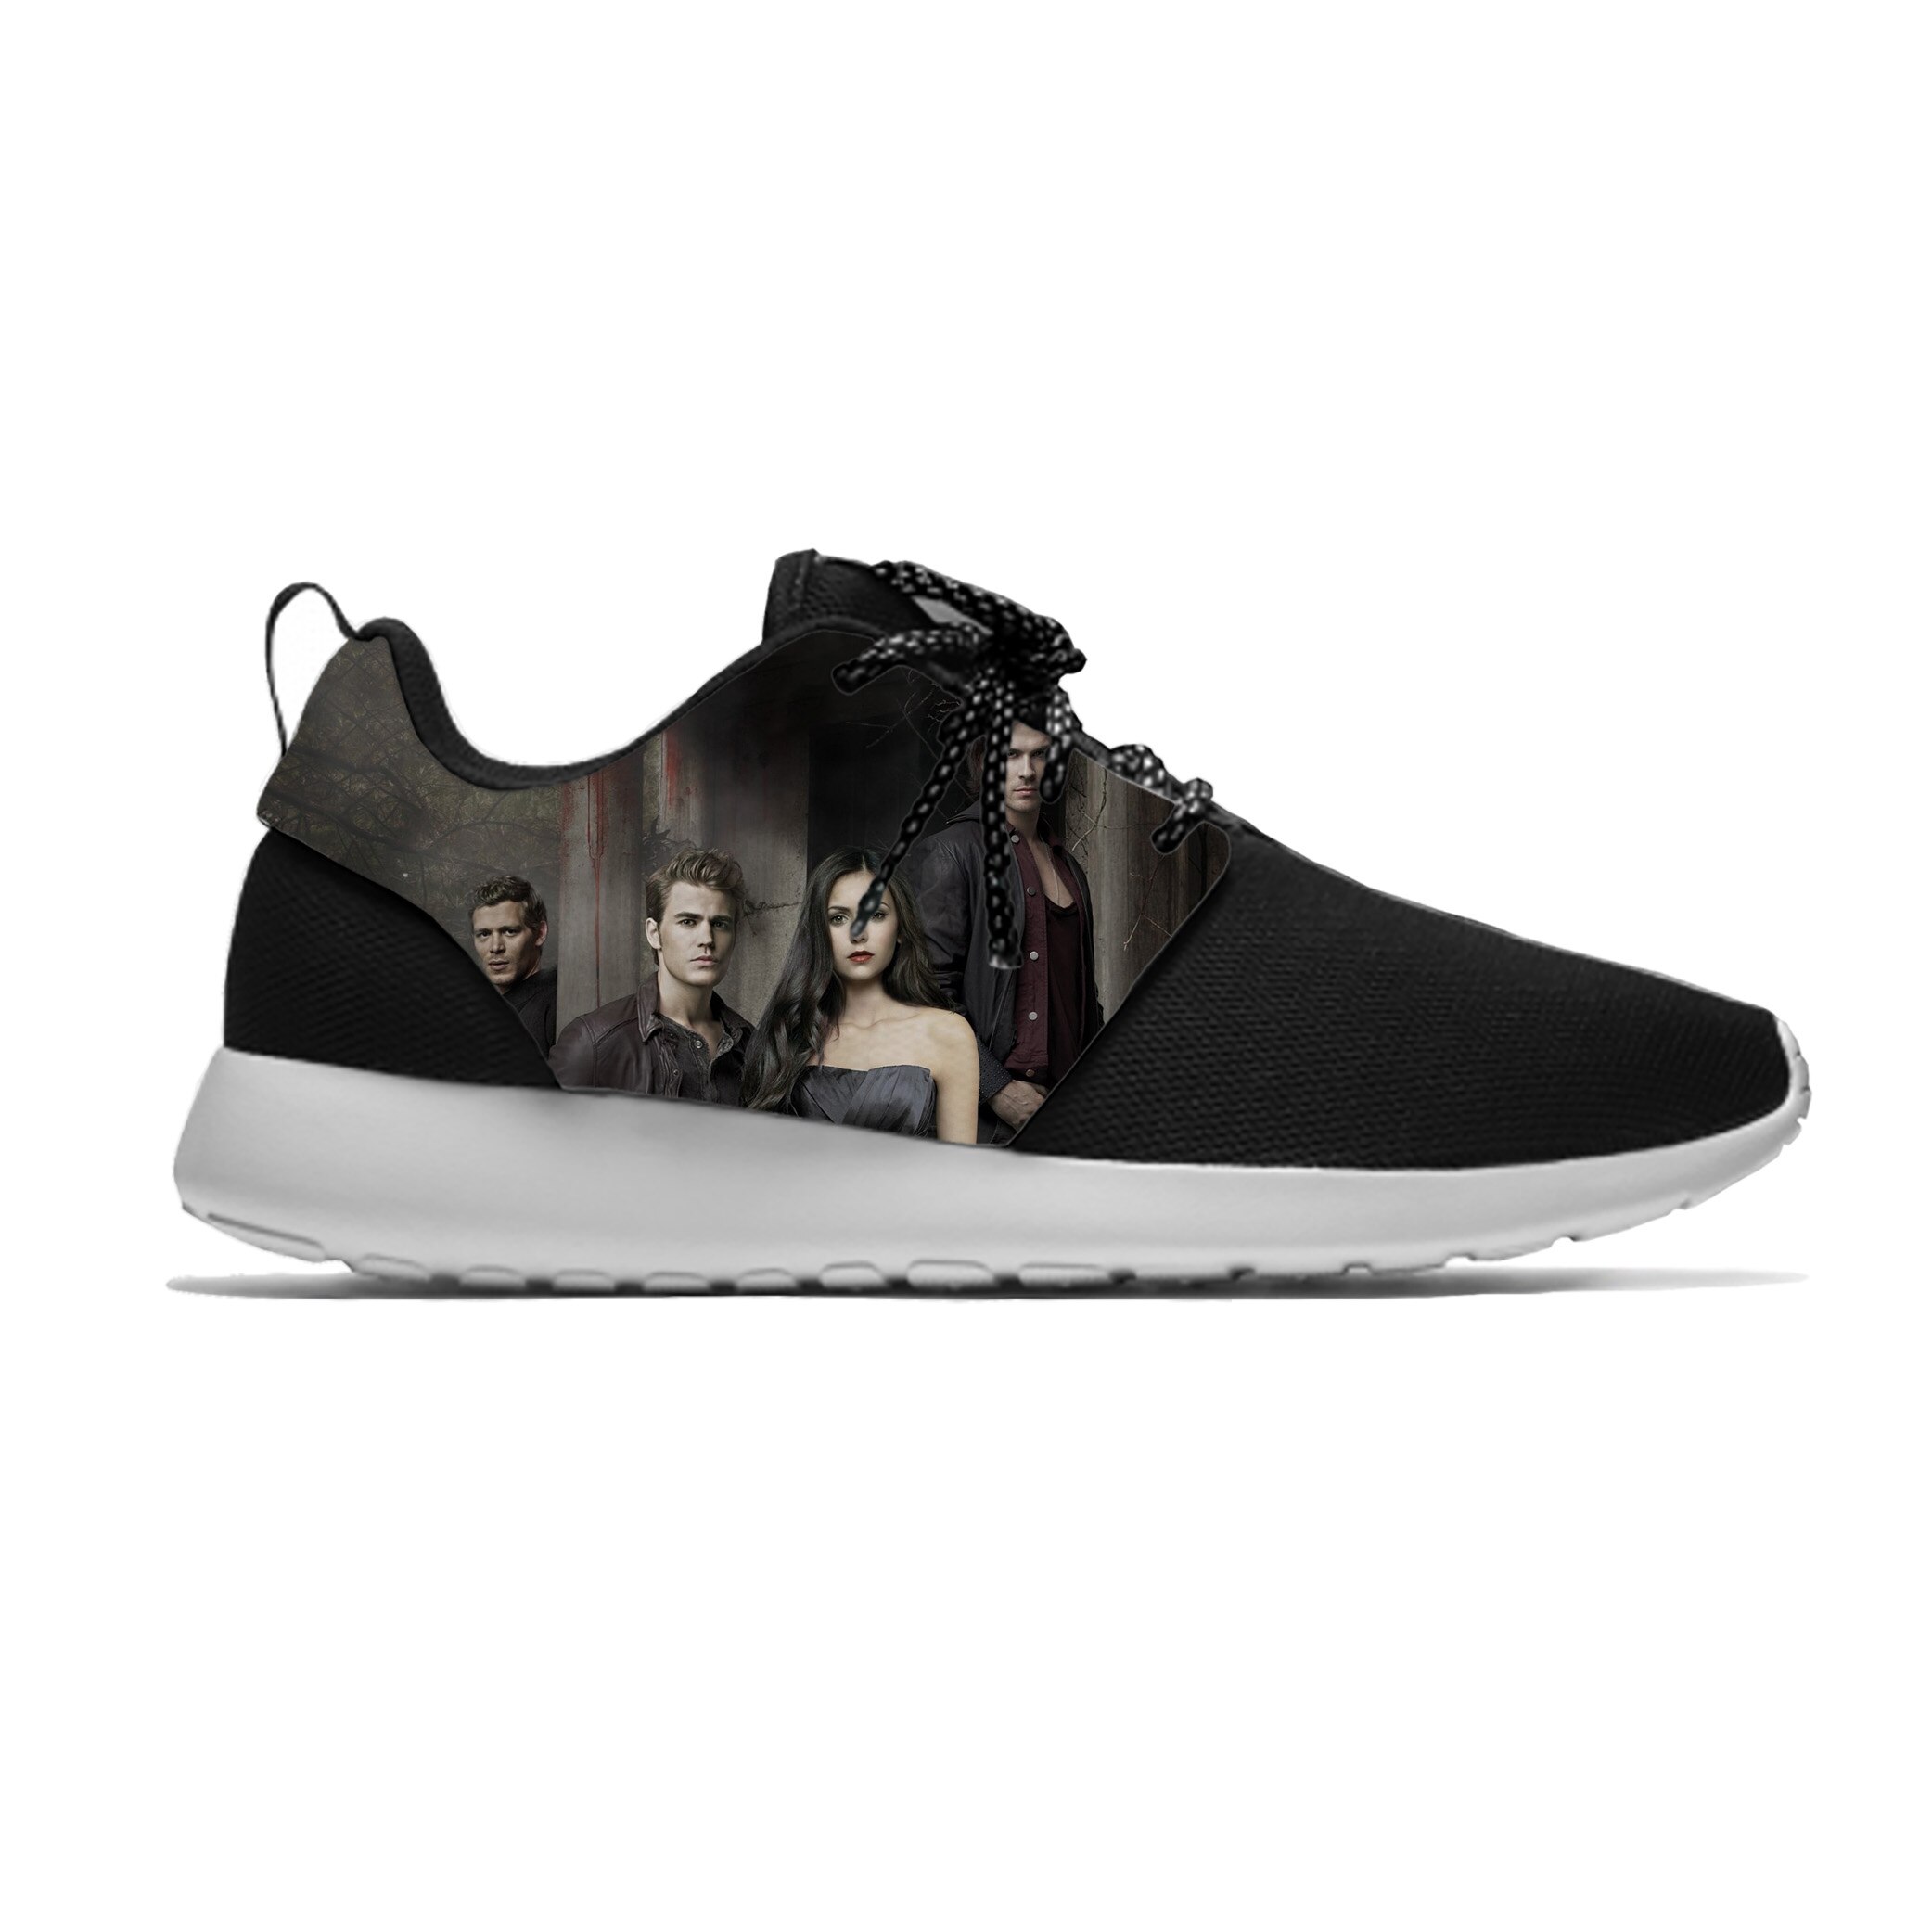 The Vampire Diaries Damon Salvatore Fashion Funny Sport Running Shoes Casual Breathable Lightweight 3D Print Men - Vampire Diaries Merch